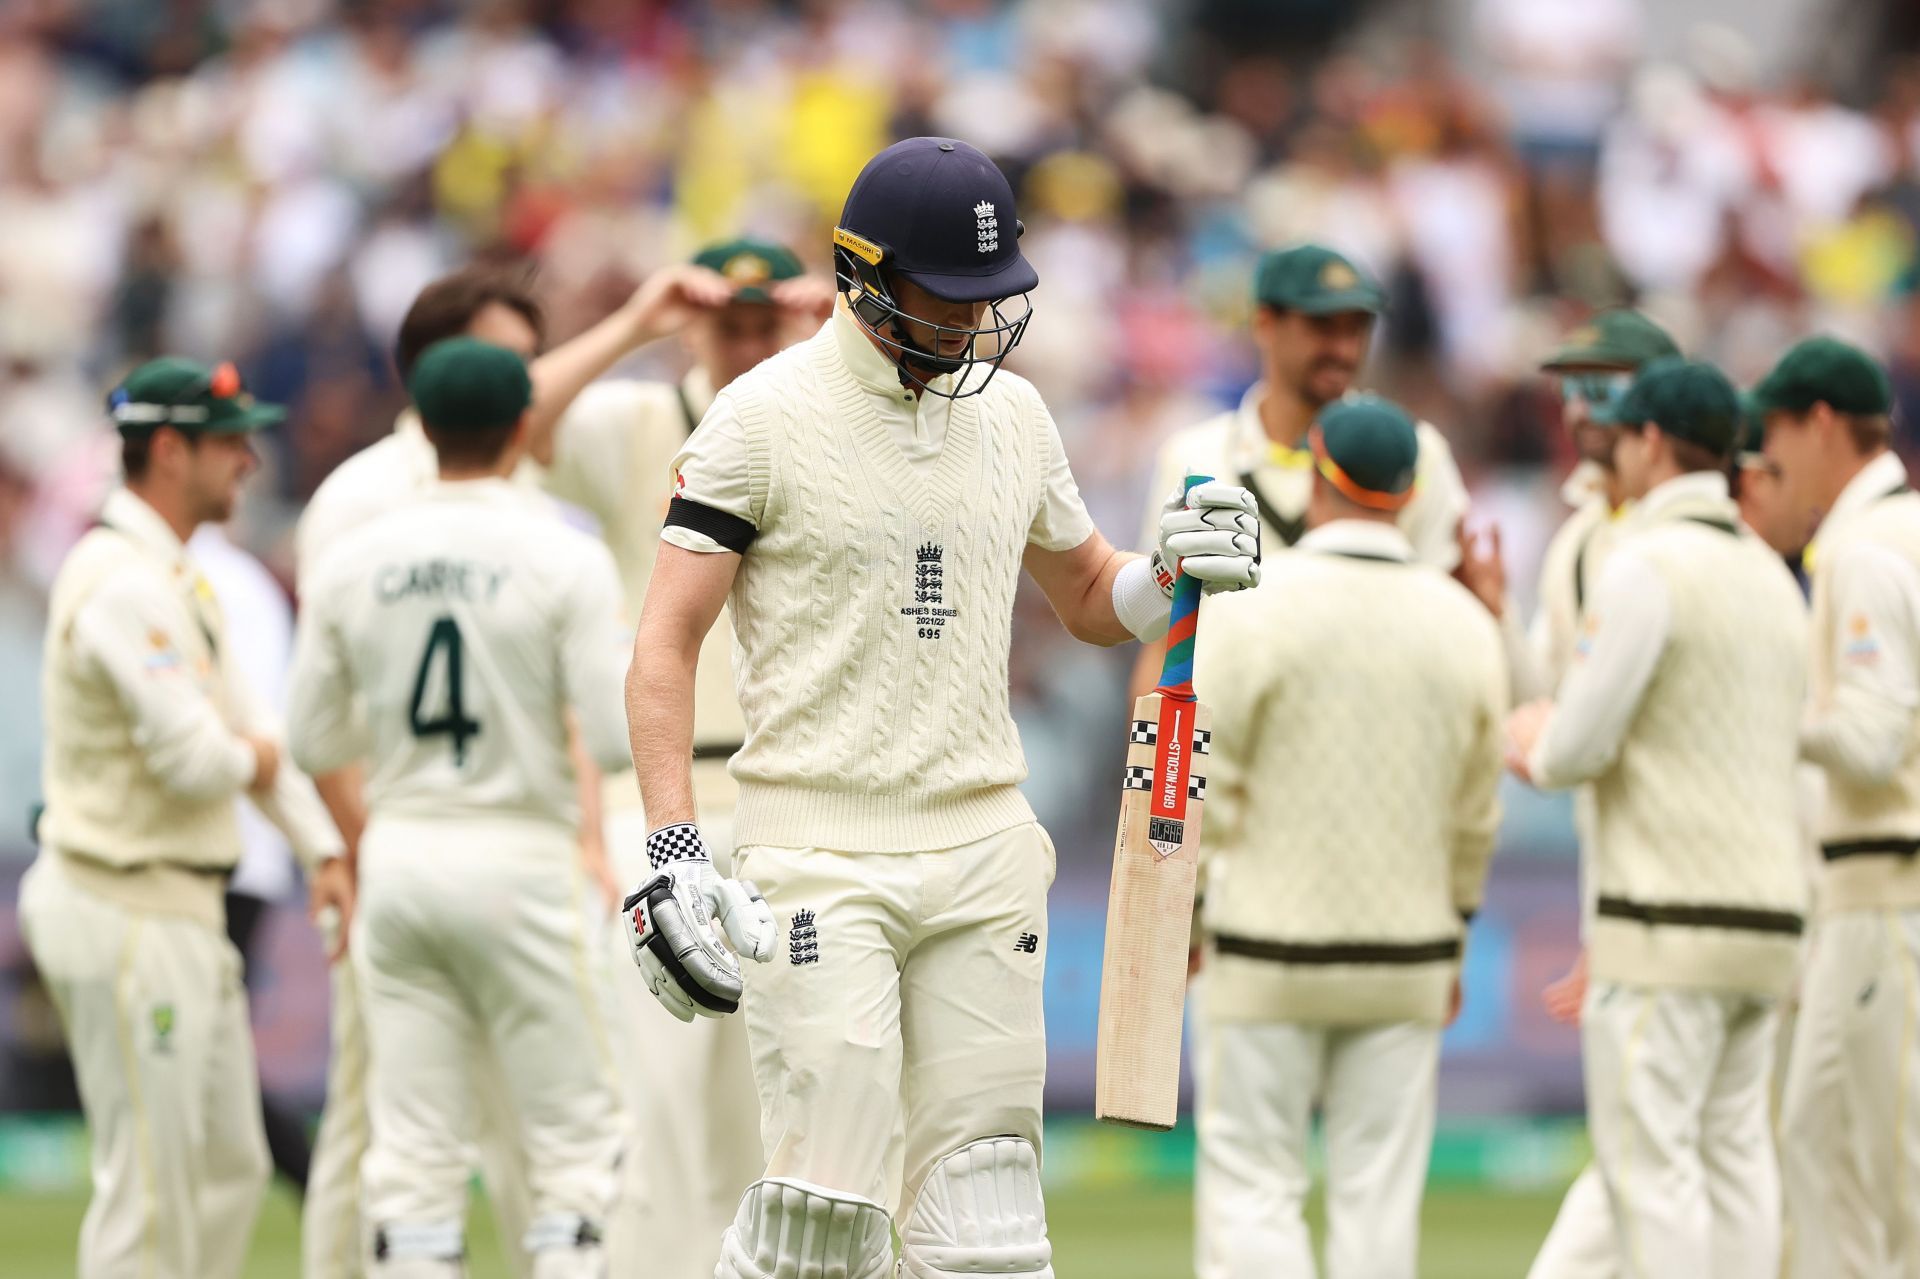 England suffered a 0-4 thrashing in the Ashes 2021-22 